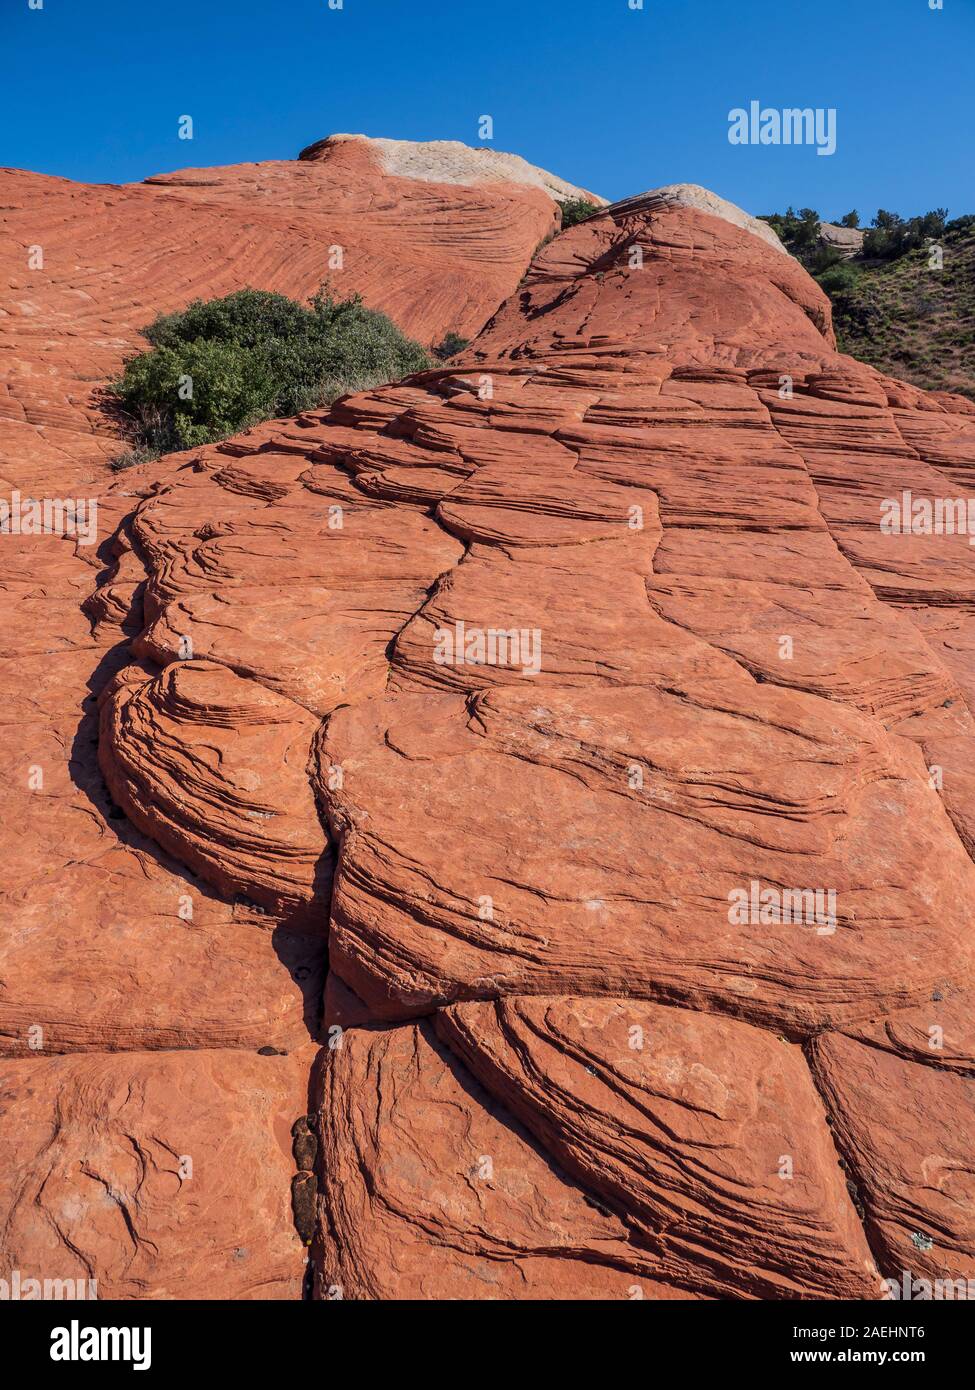 Cross-bedded sandstone, Lava Flow Trail, Snow Canyon State Park, Saint George, Utah. Stock Photo